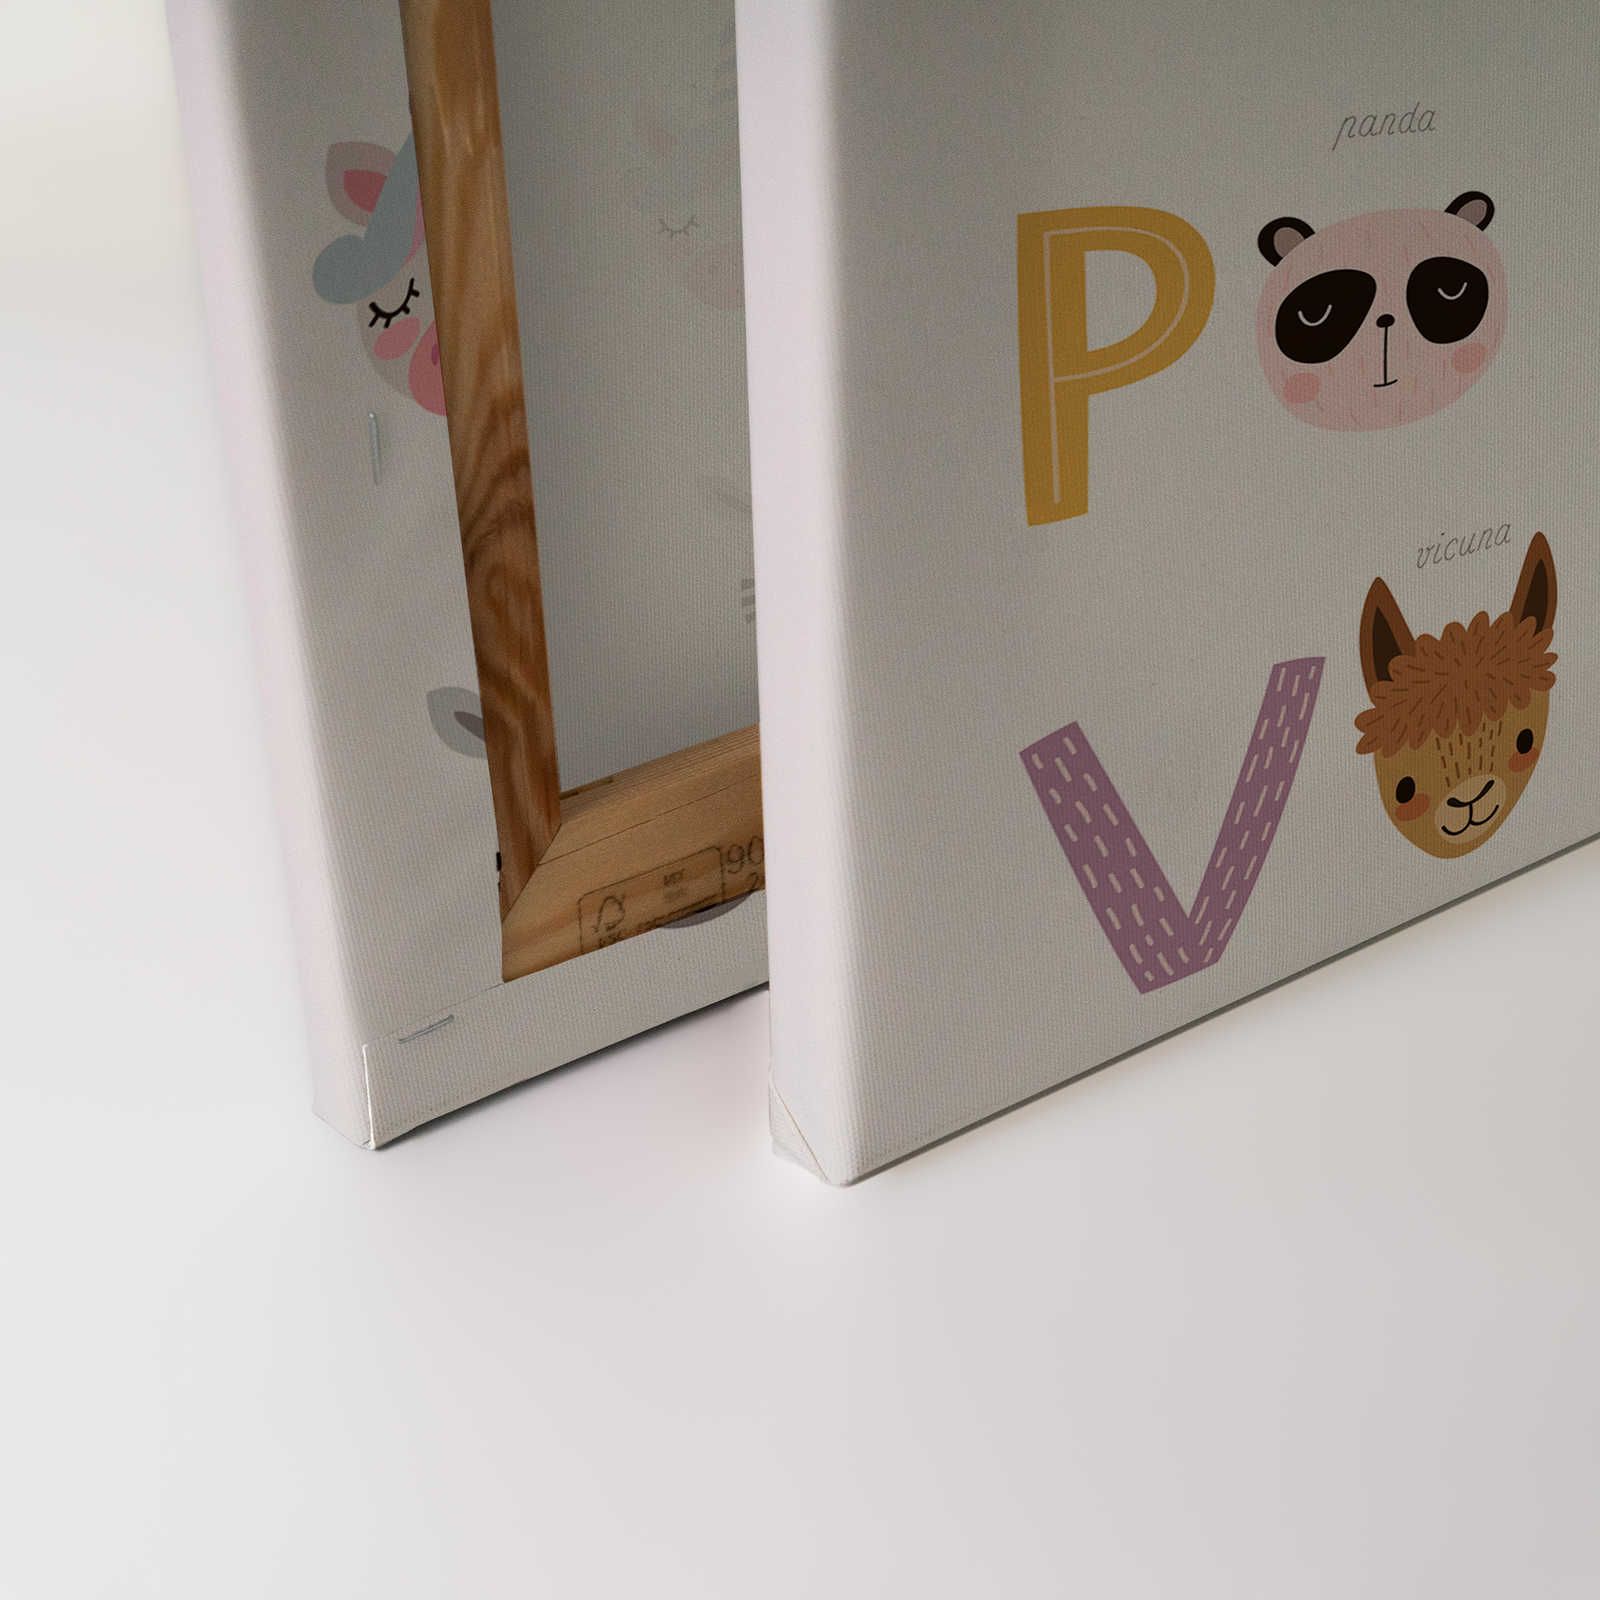             Canvas ABC with animals and animal names - 120 cm x 80 cm
        